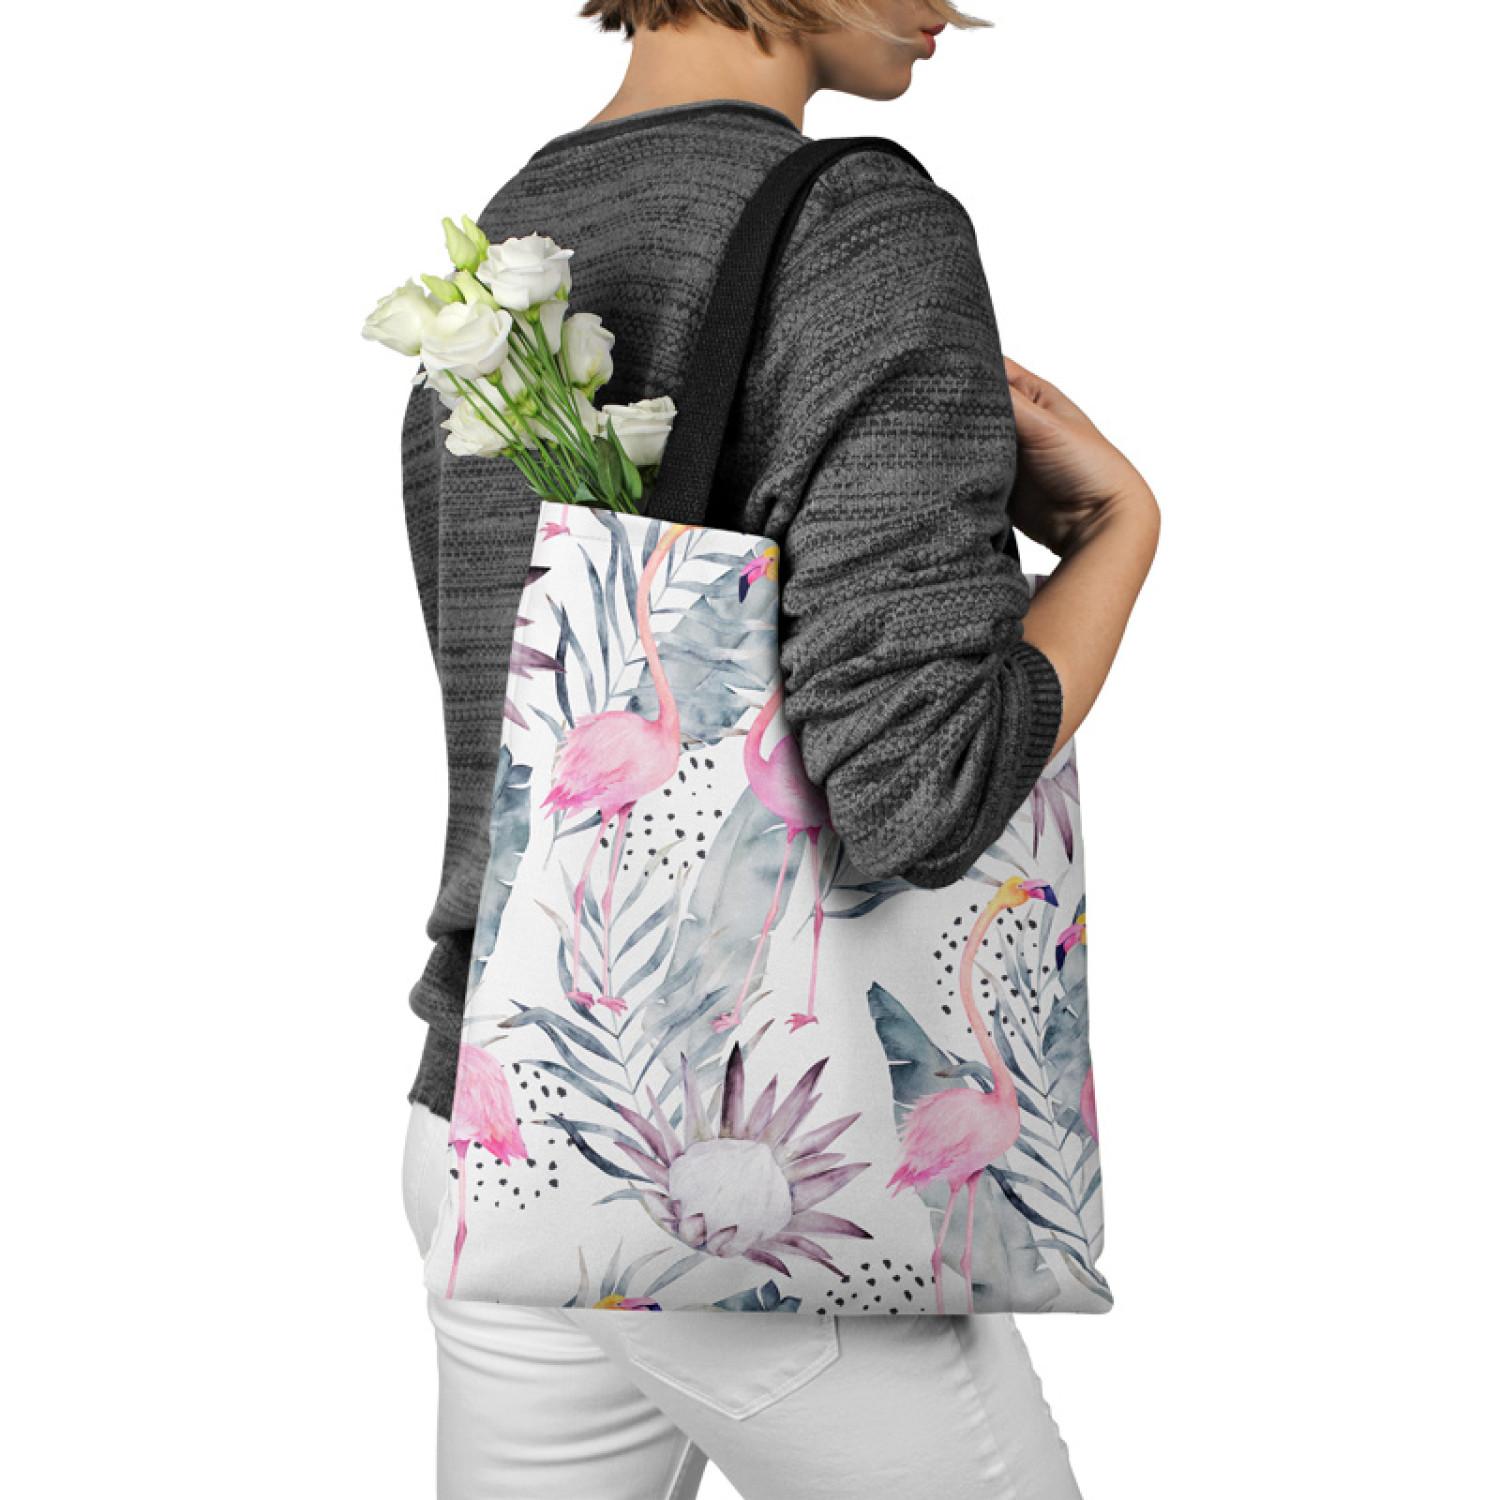 Shopping Bag Flamingos on holiday - floral design with exotic leaves and birds